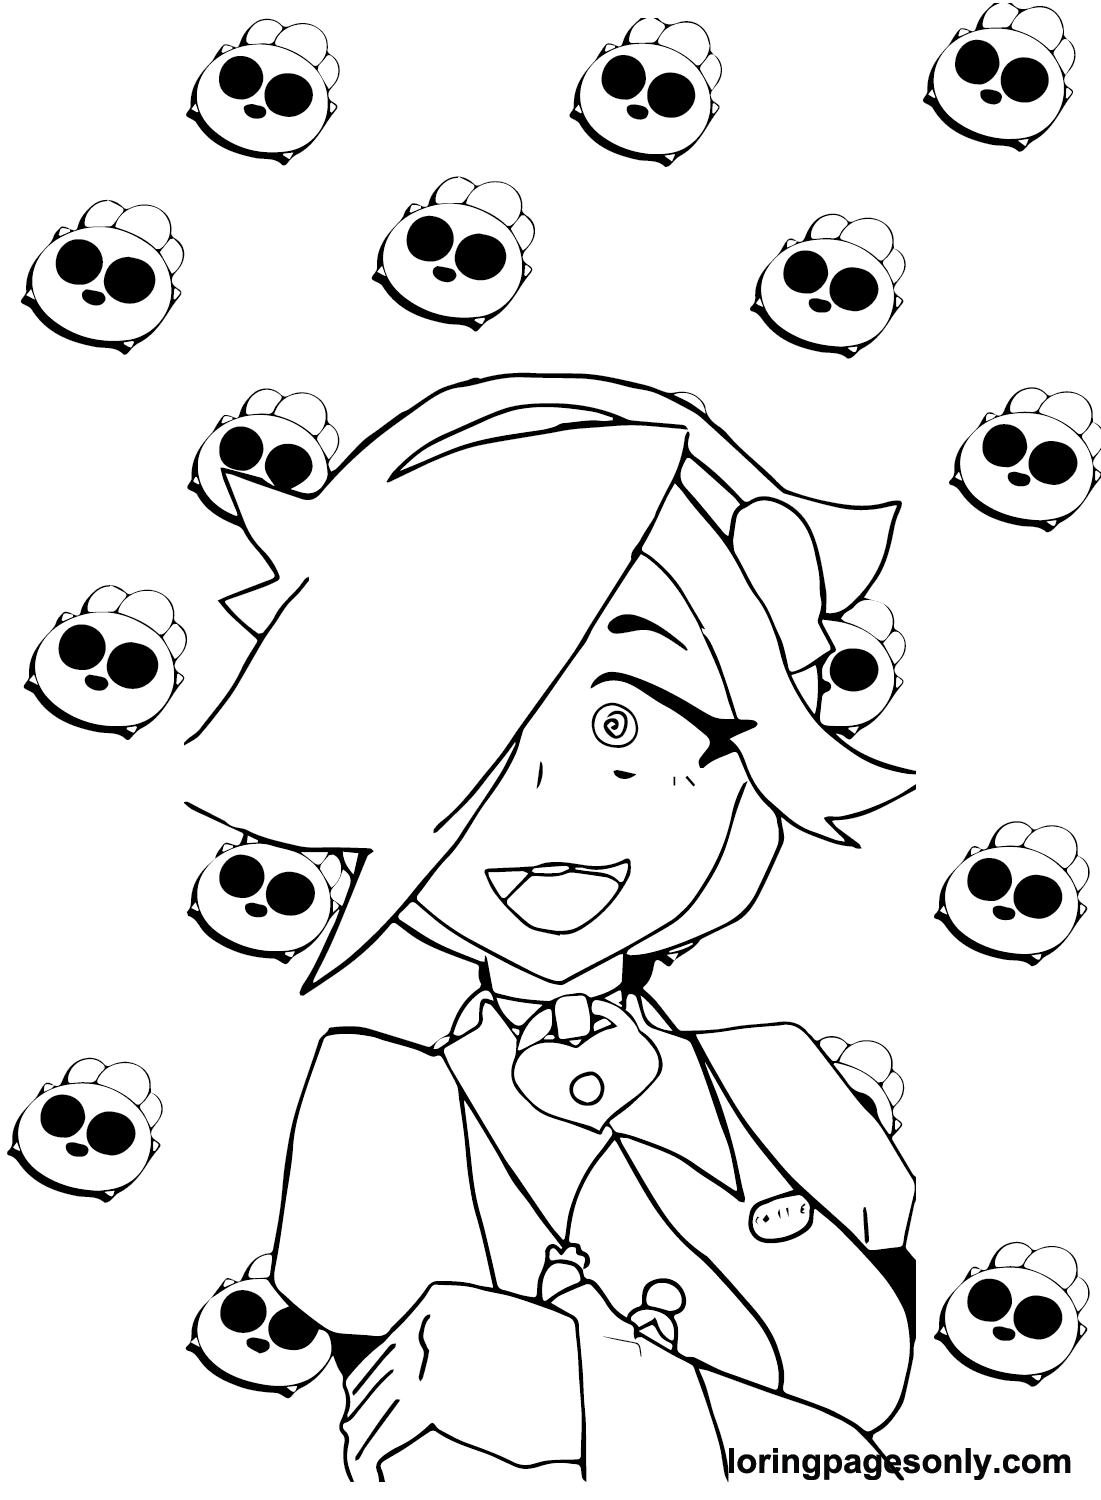 Printable Colette Brawl Stars Coloring Page